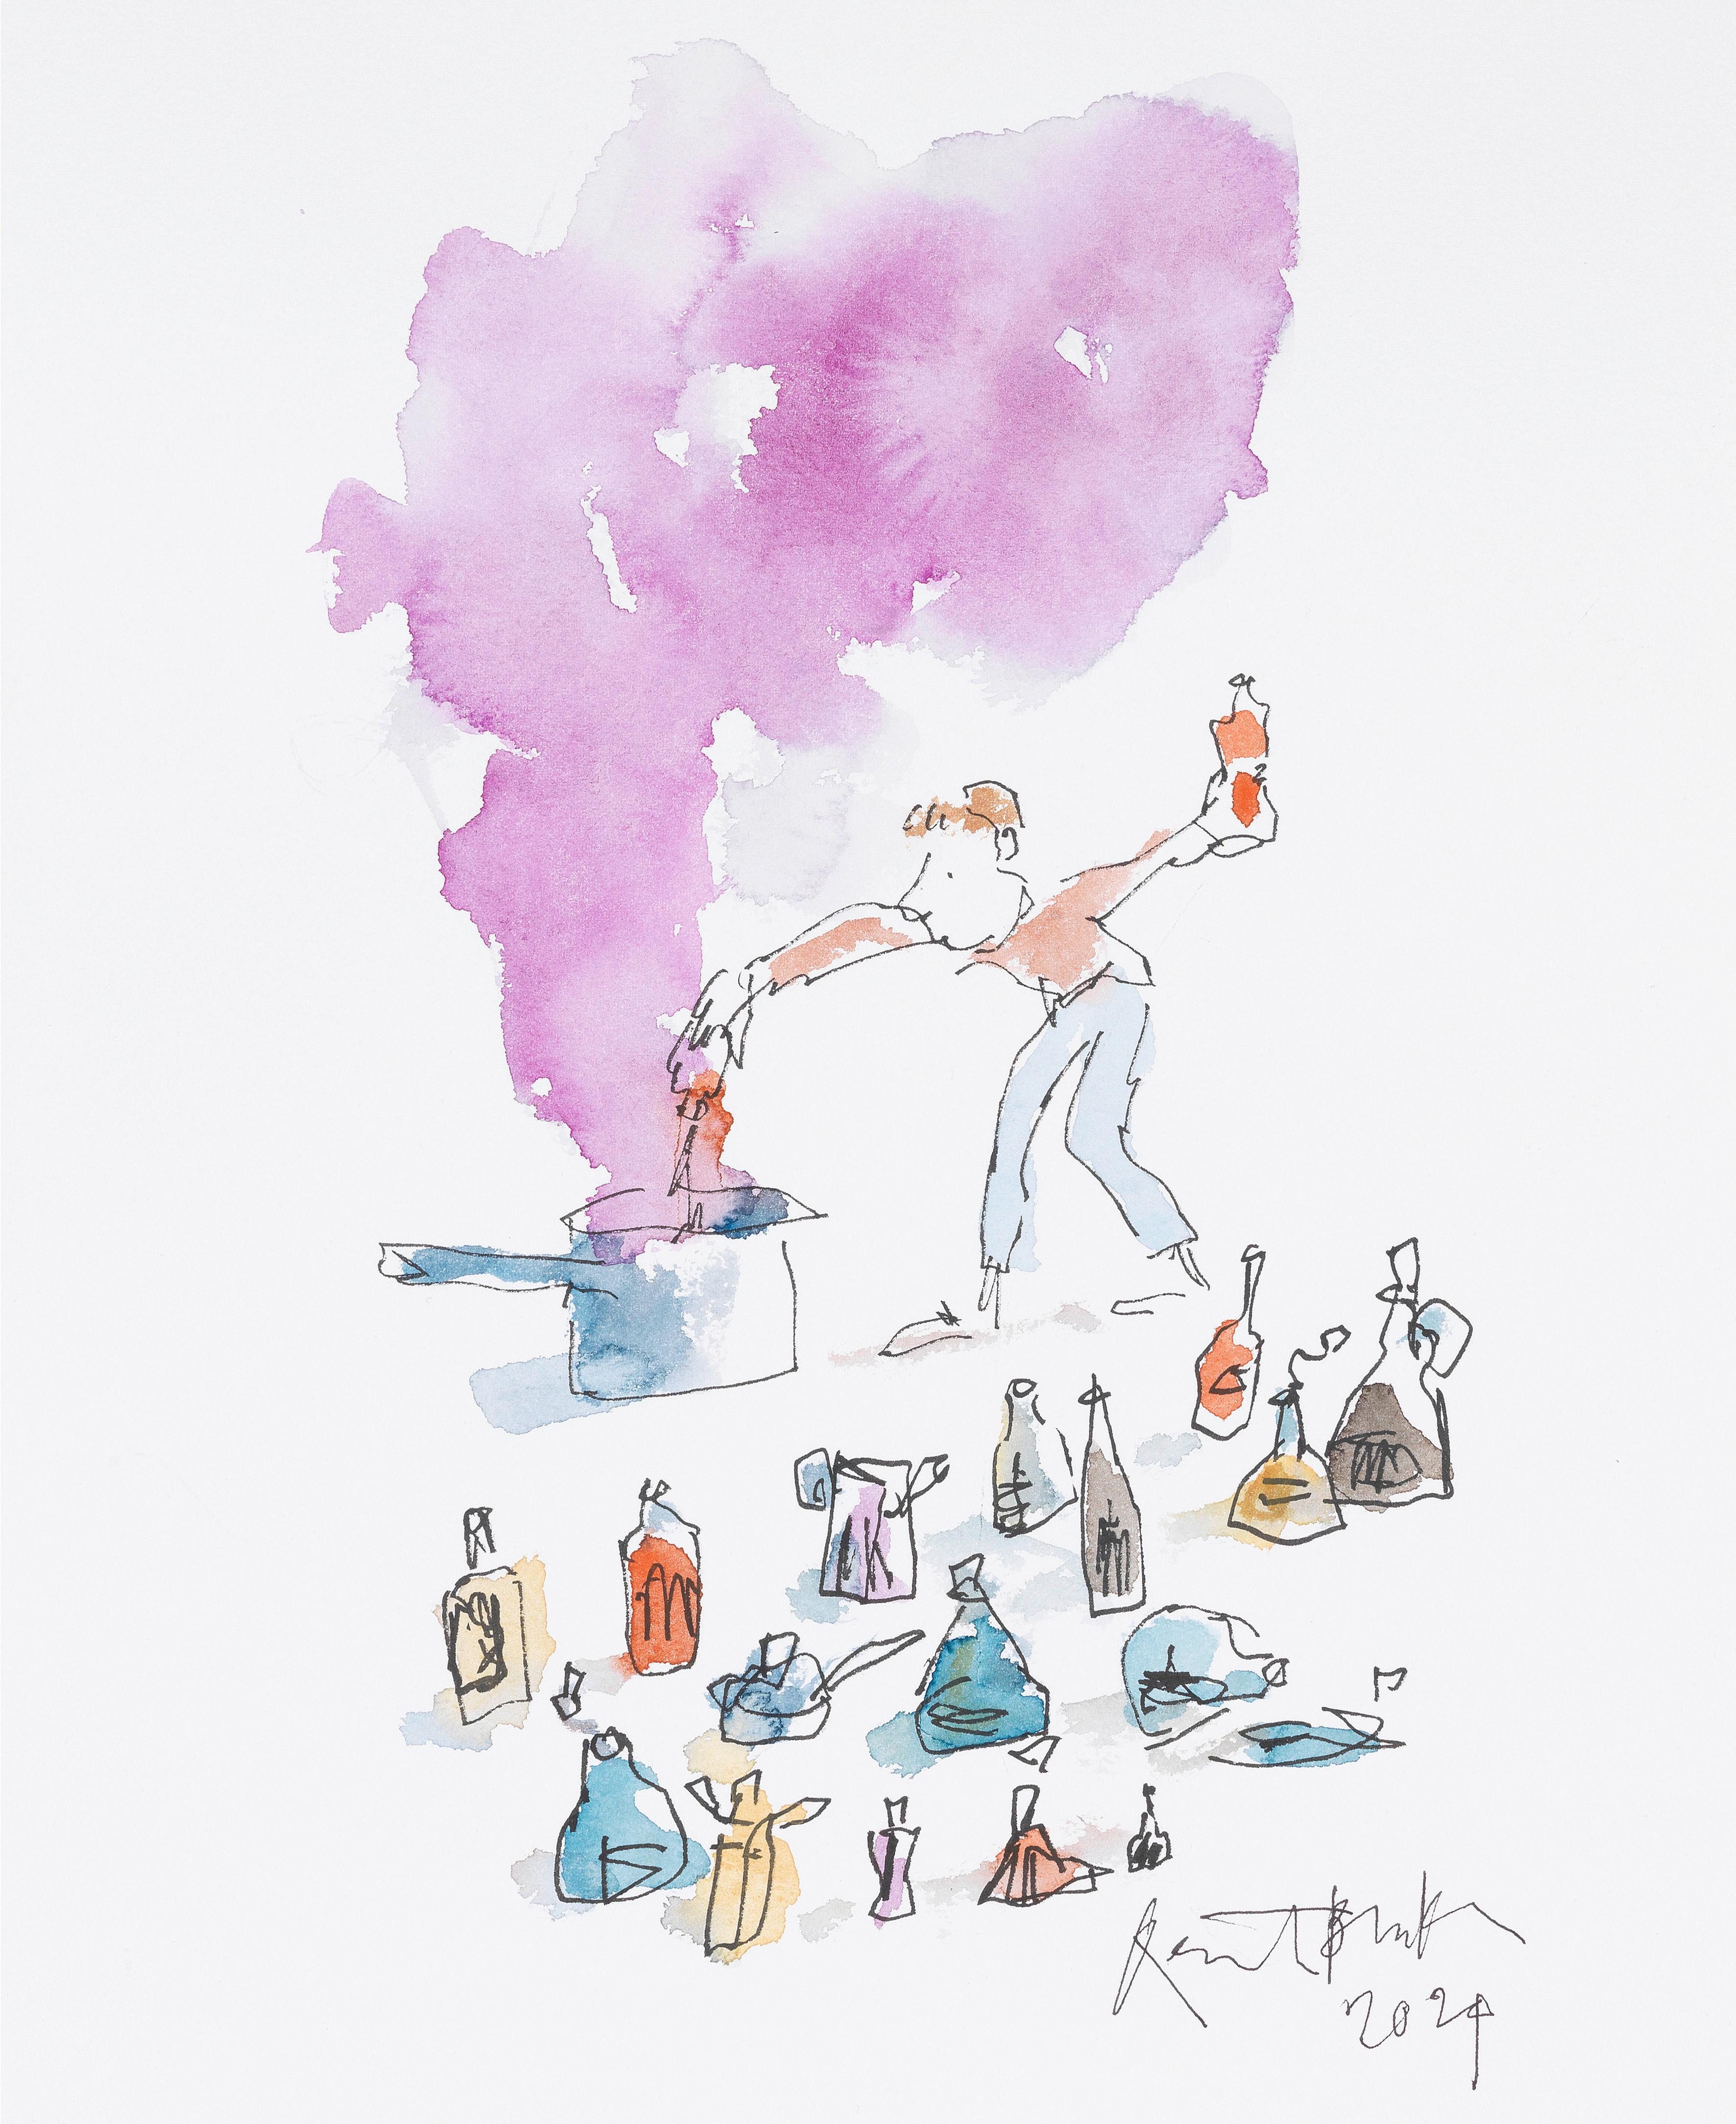 Illustration of a child surrounded by bottles, they are pouring the contents of one of the bottles into a big metal saucepan. Purple smoke is coming out of the pan.